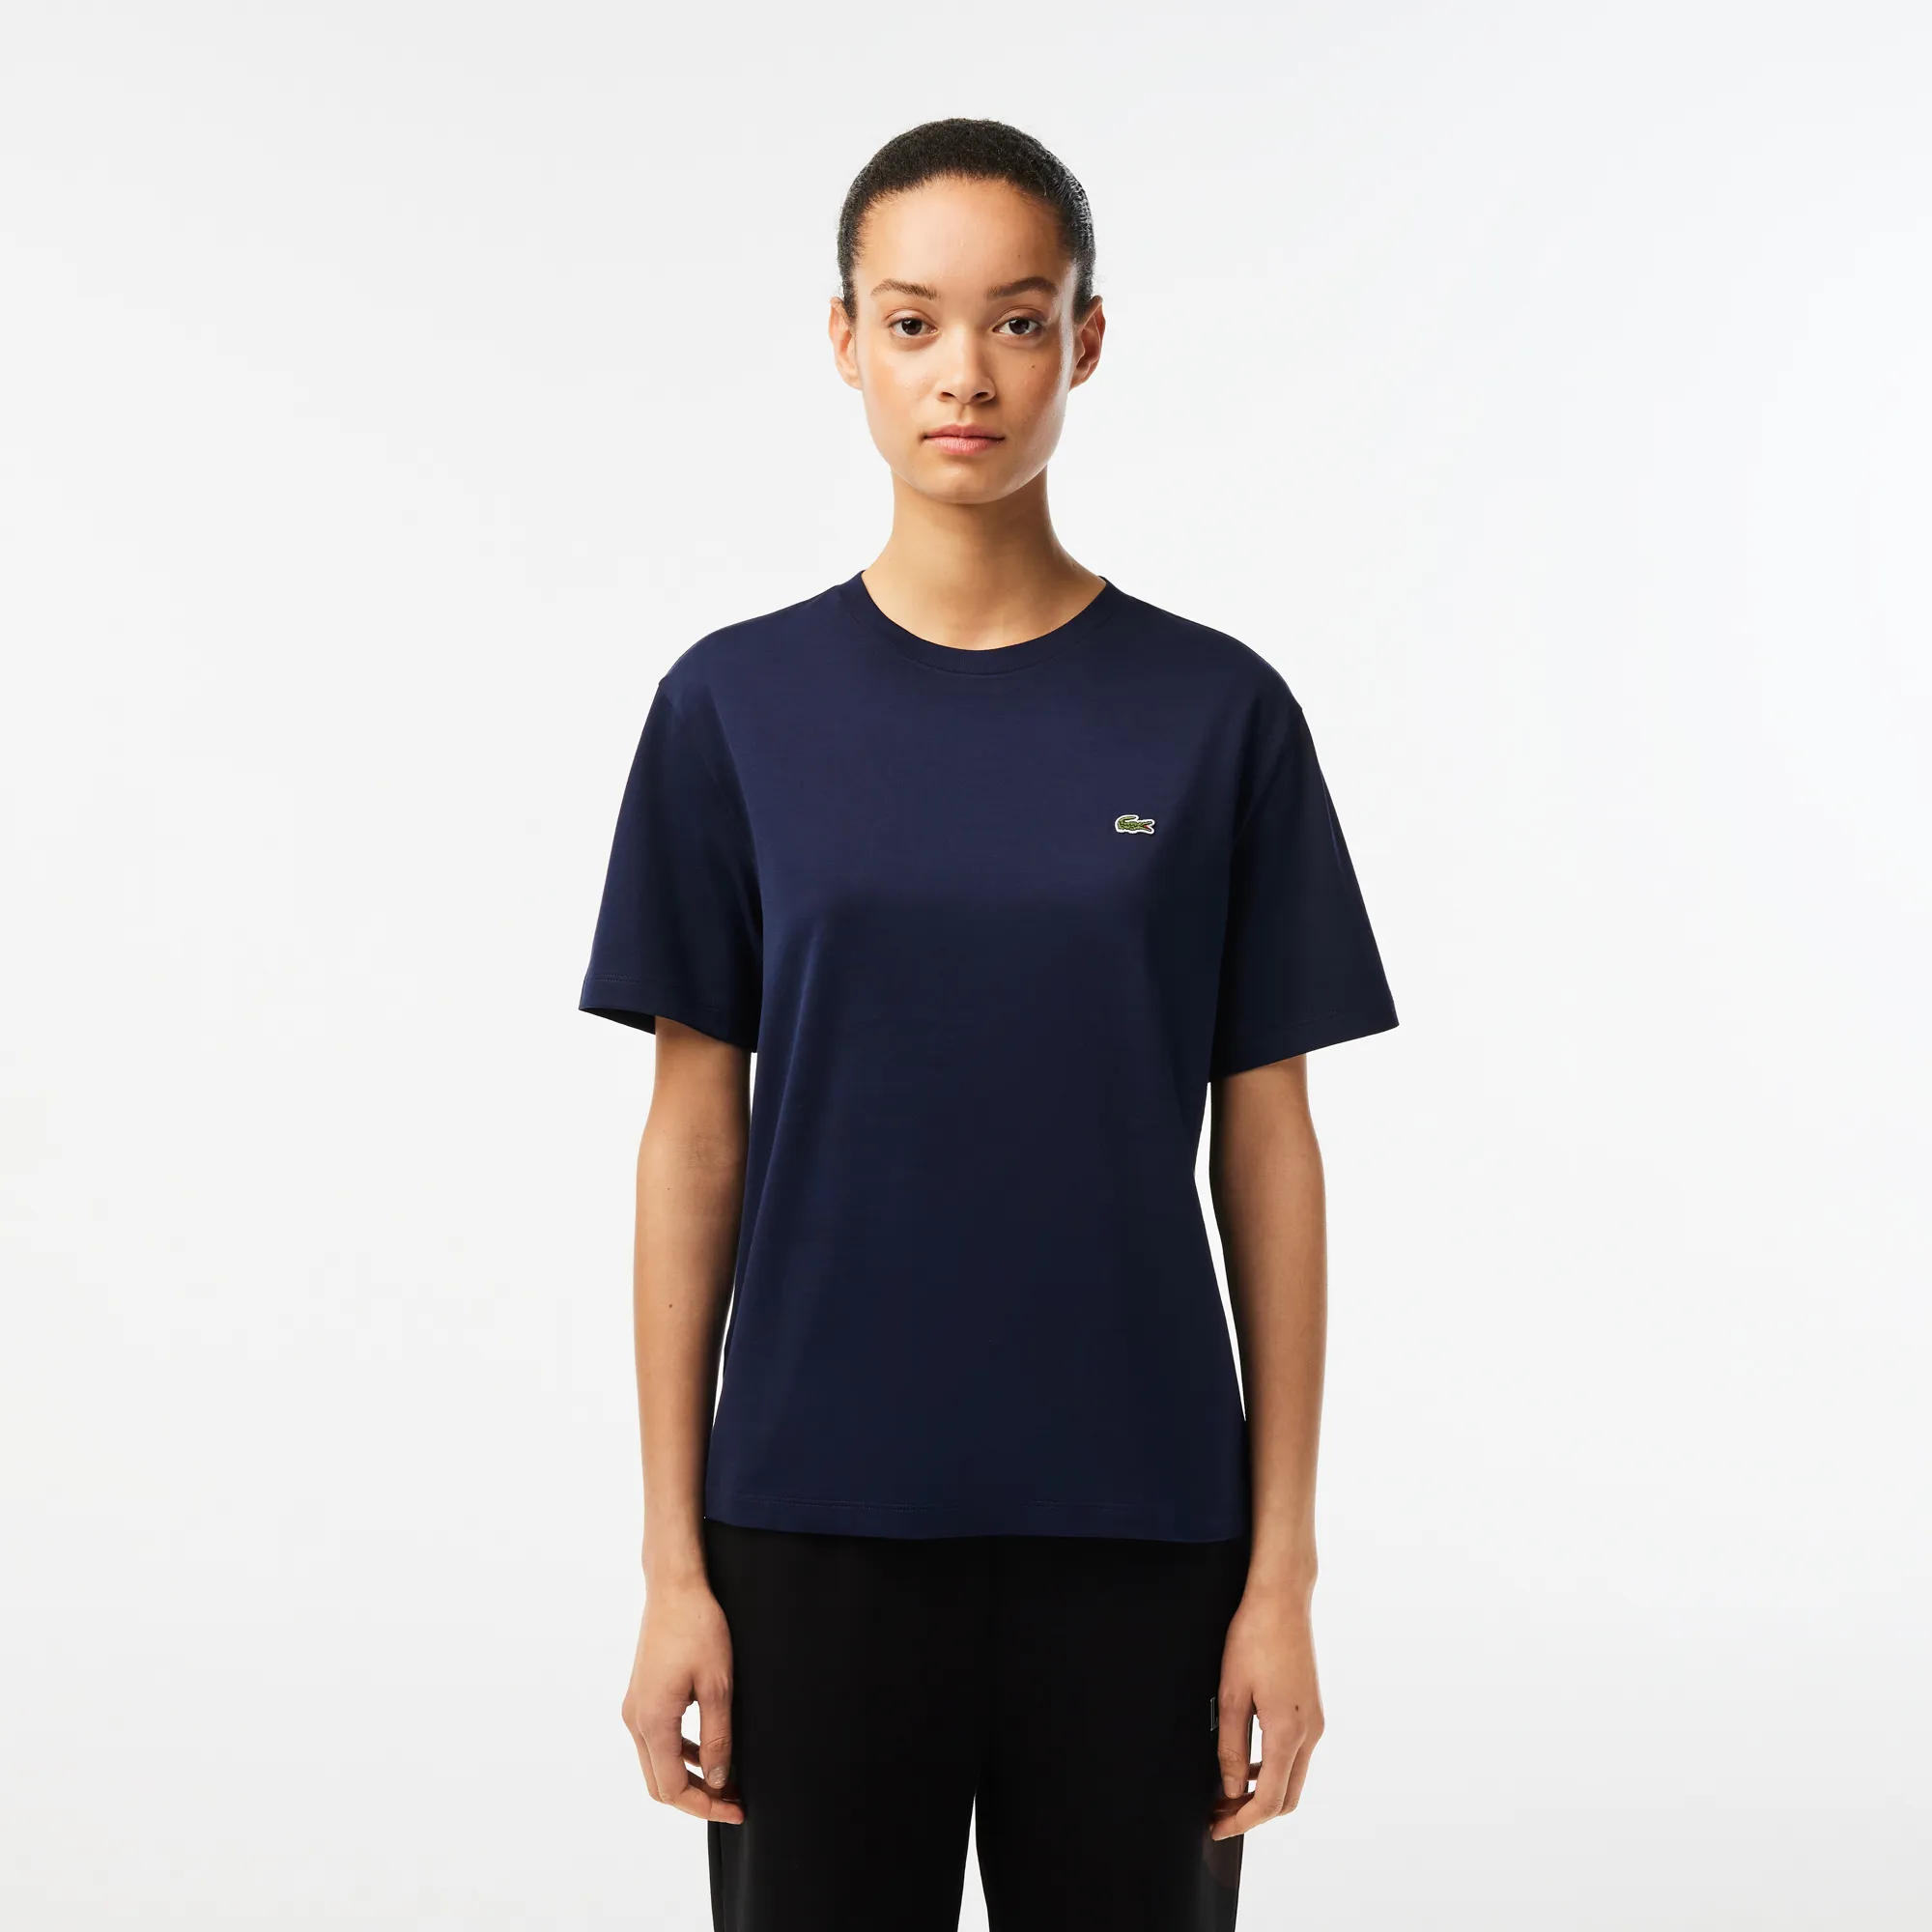 Quần Ngắn Lacoste Signature Unisex Họa Tiết In